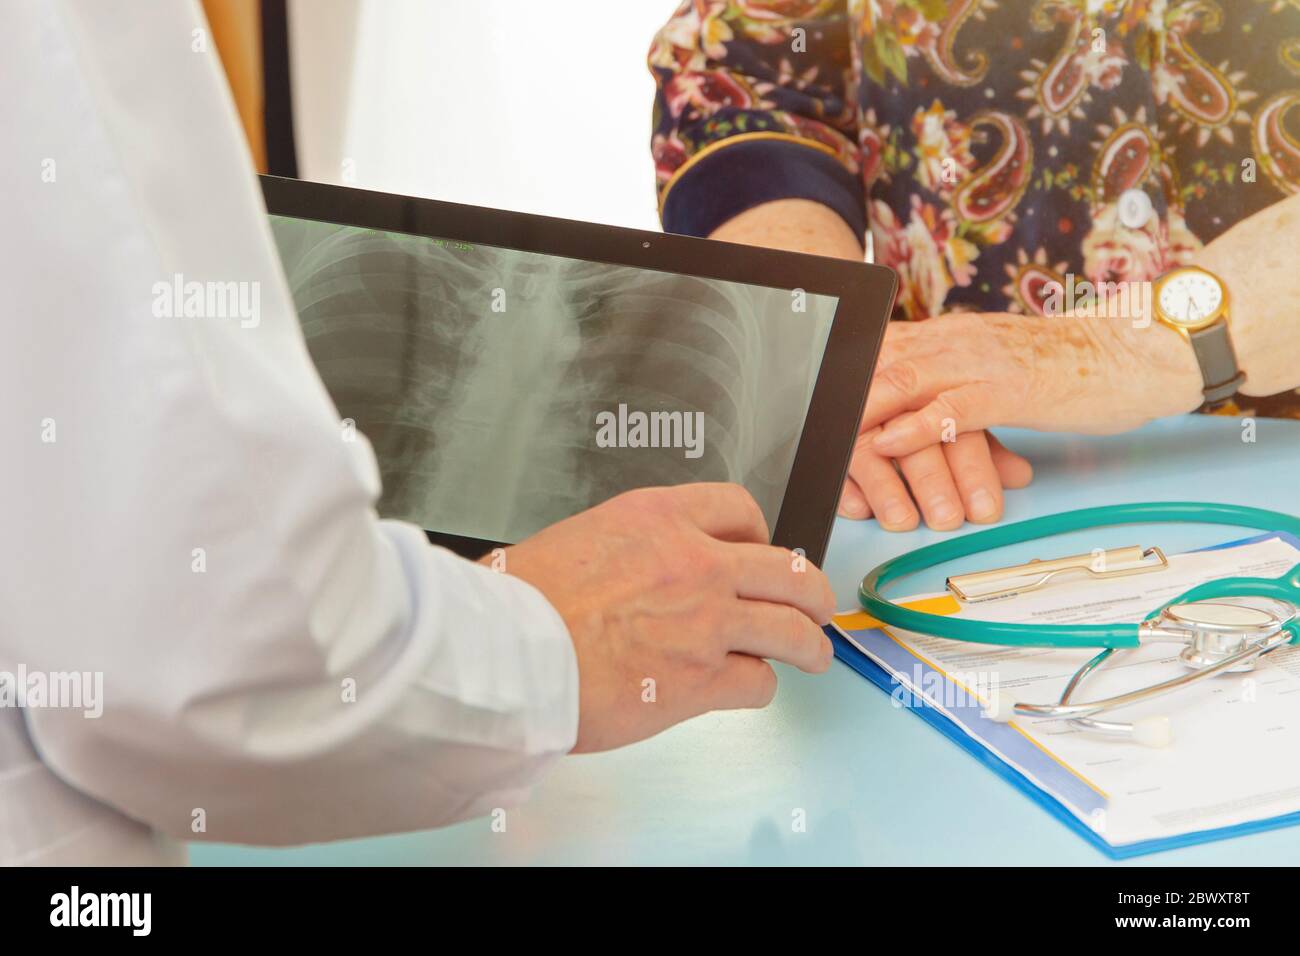 Doctor shows elderly woman MRI results on tablet screen Stock Photo